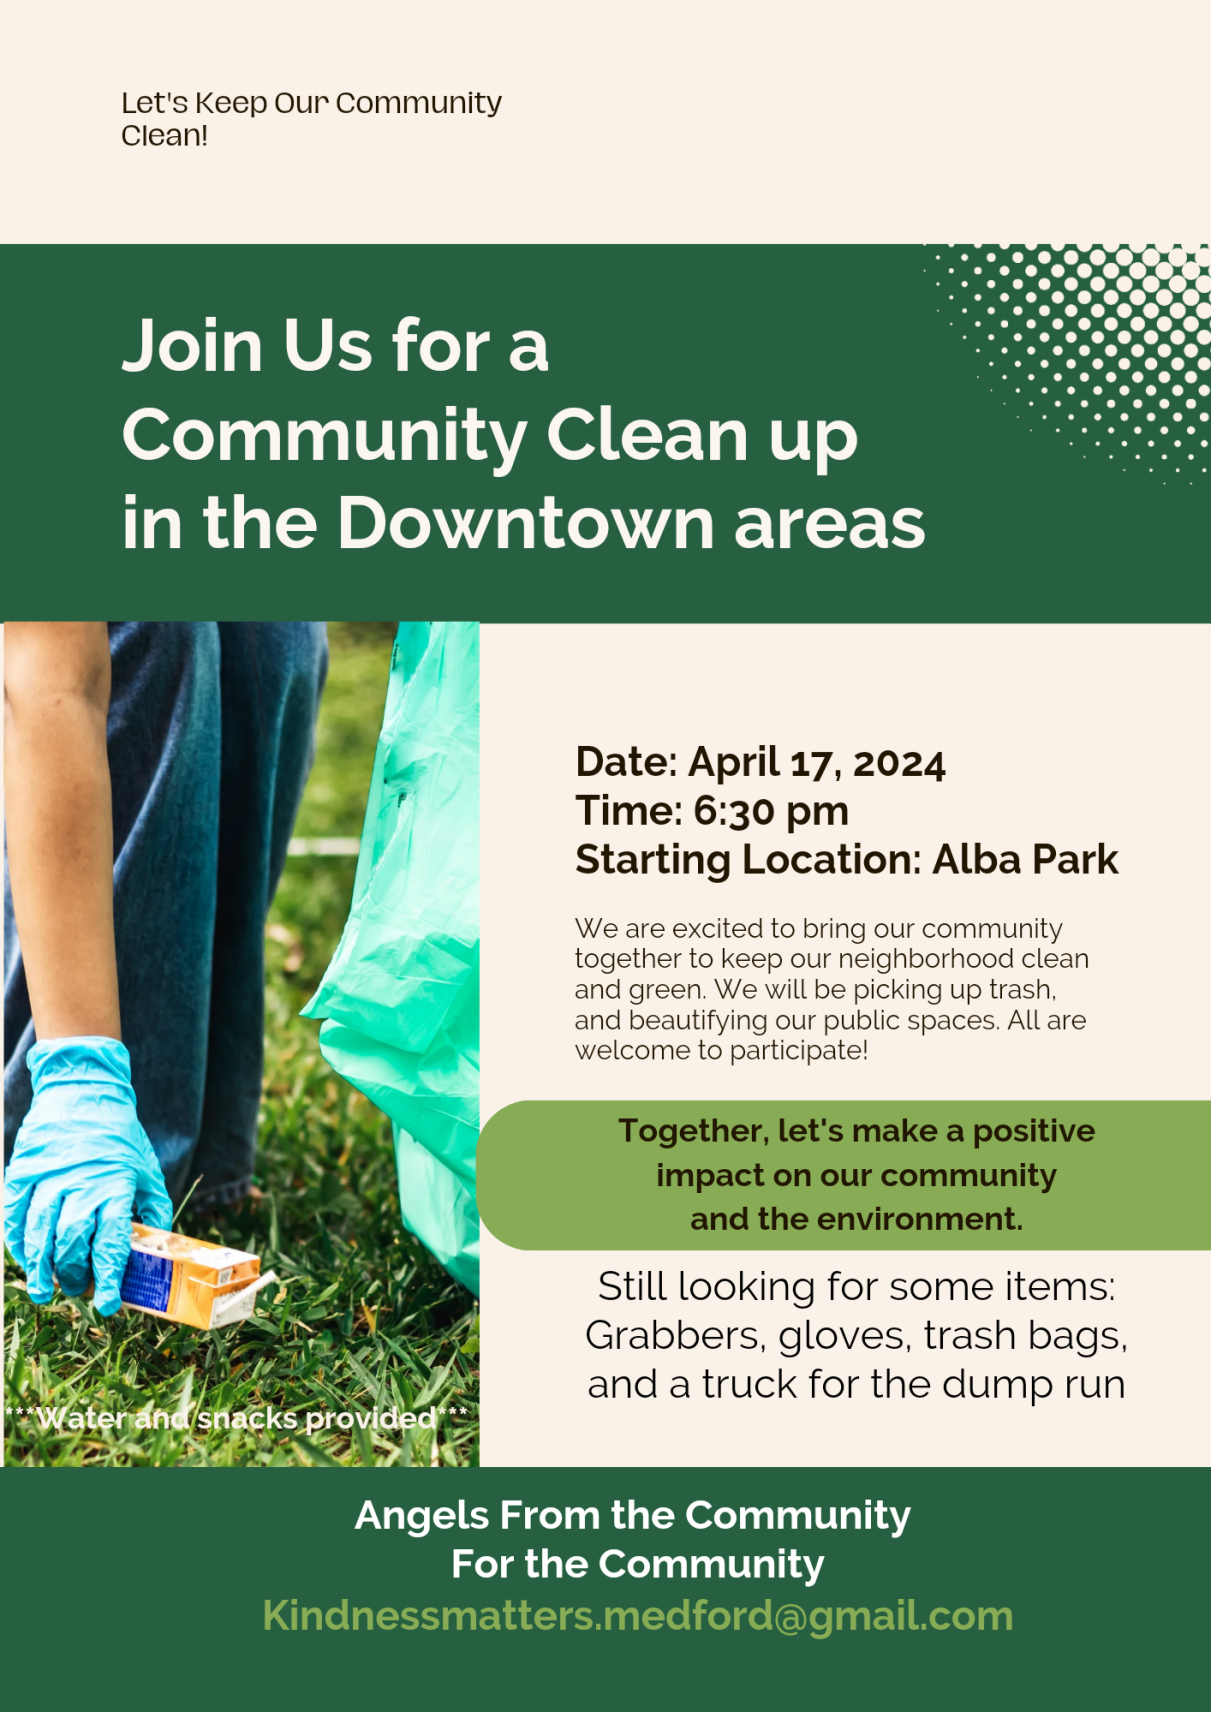 Downtown Medford community clean up event | Top Stories ...